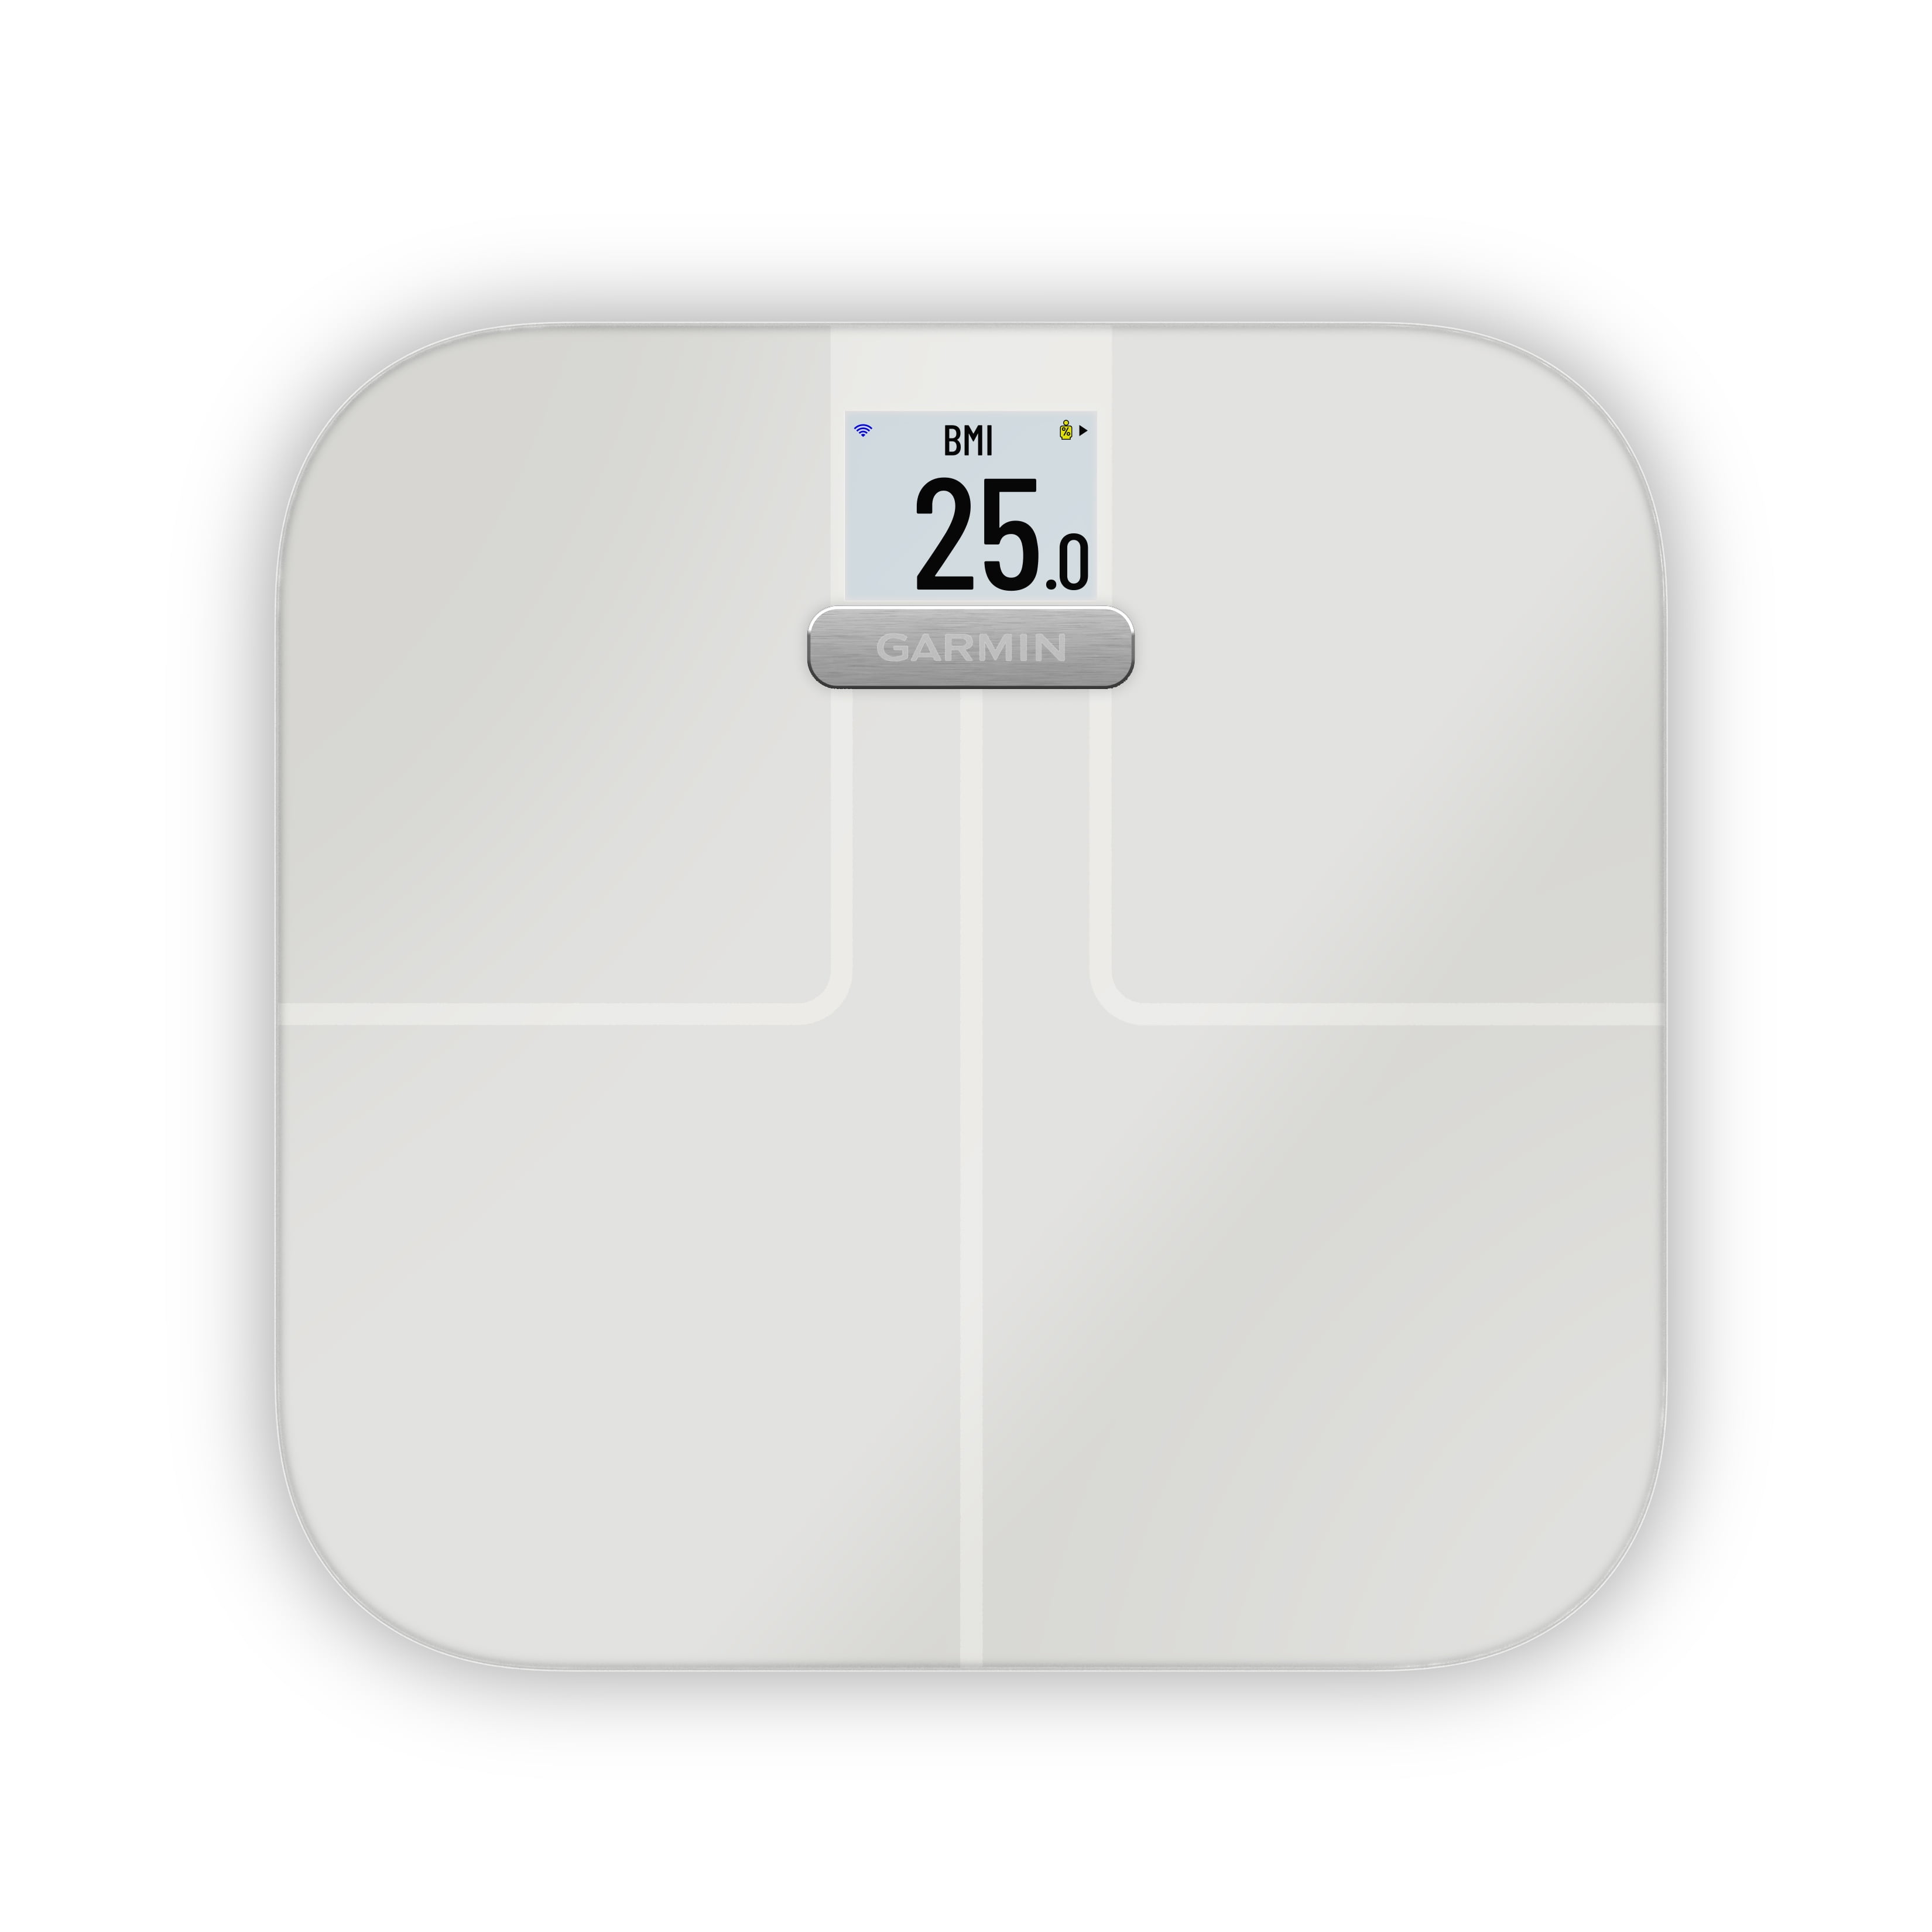 TEST: Garmin Index S2 Scale – The scale that gathers all your data